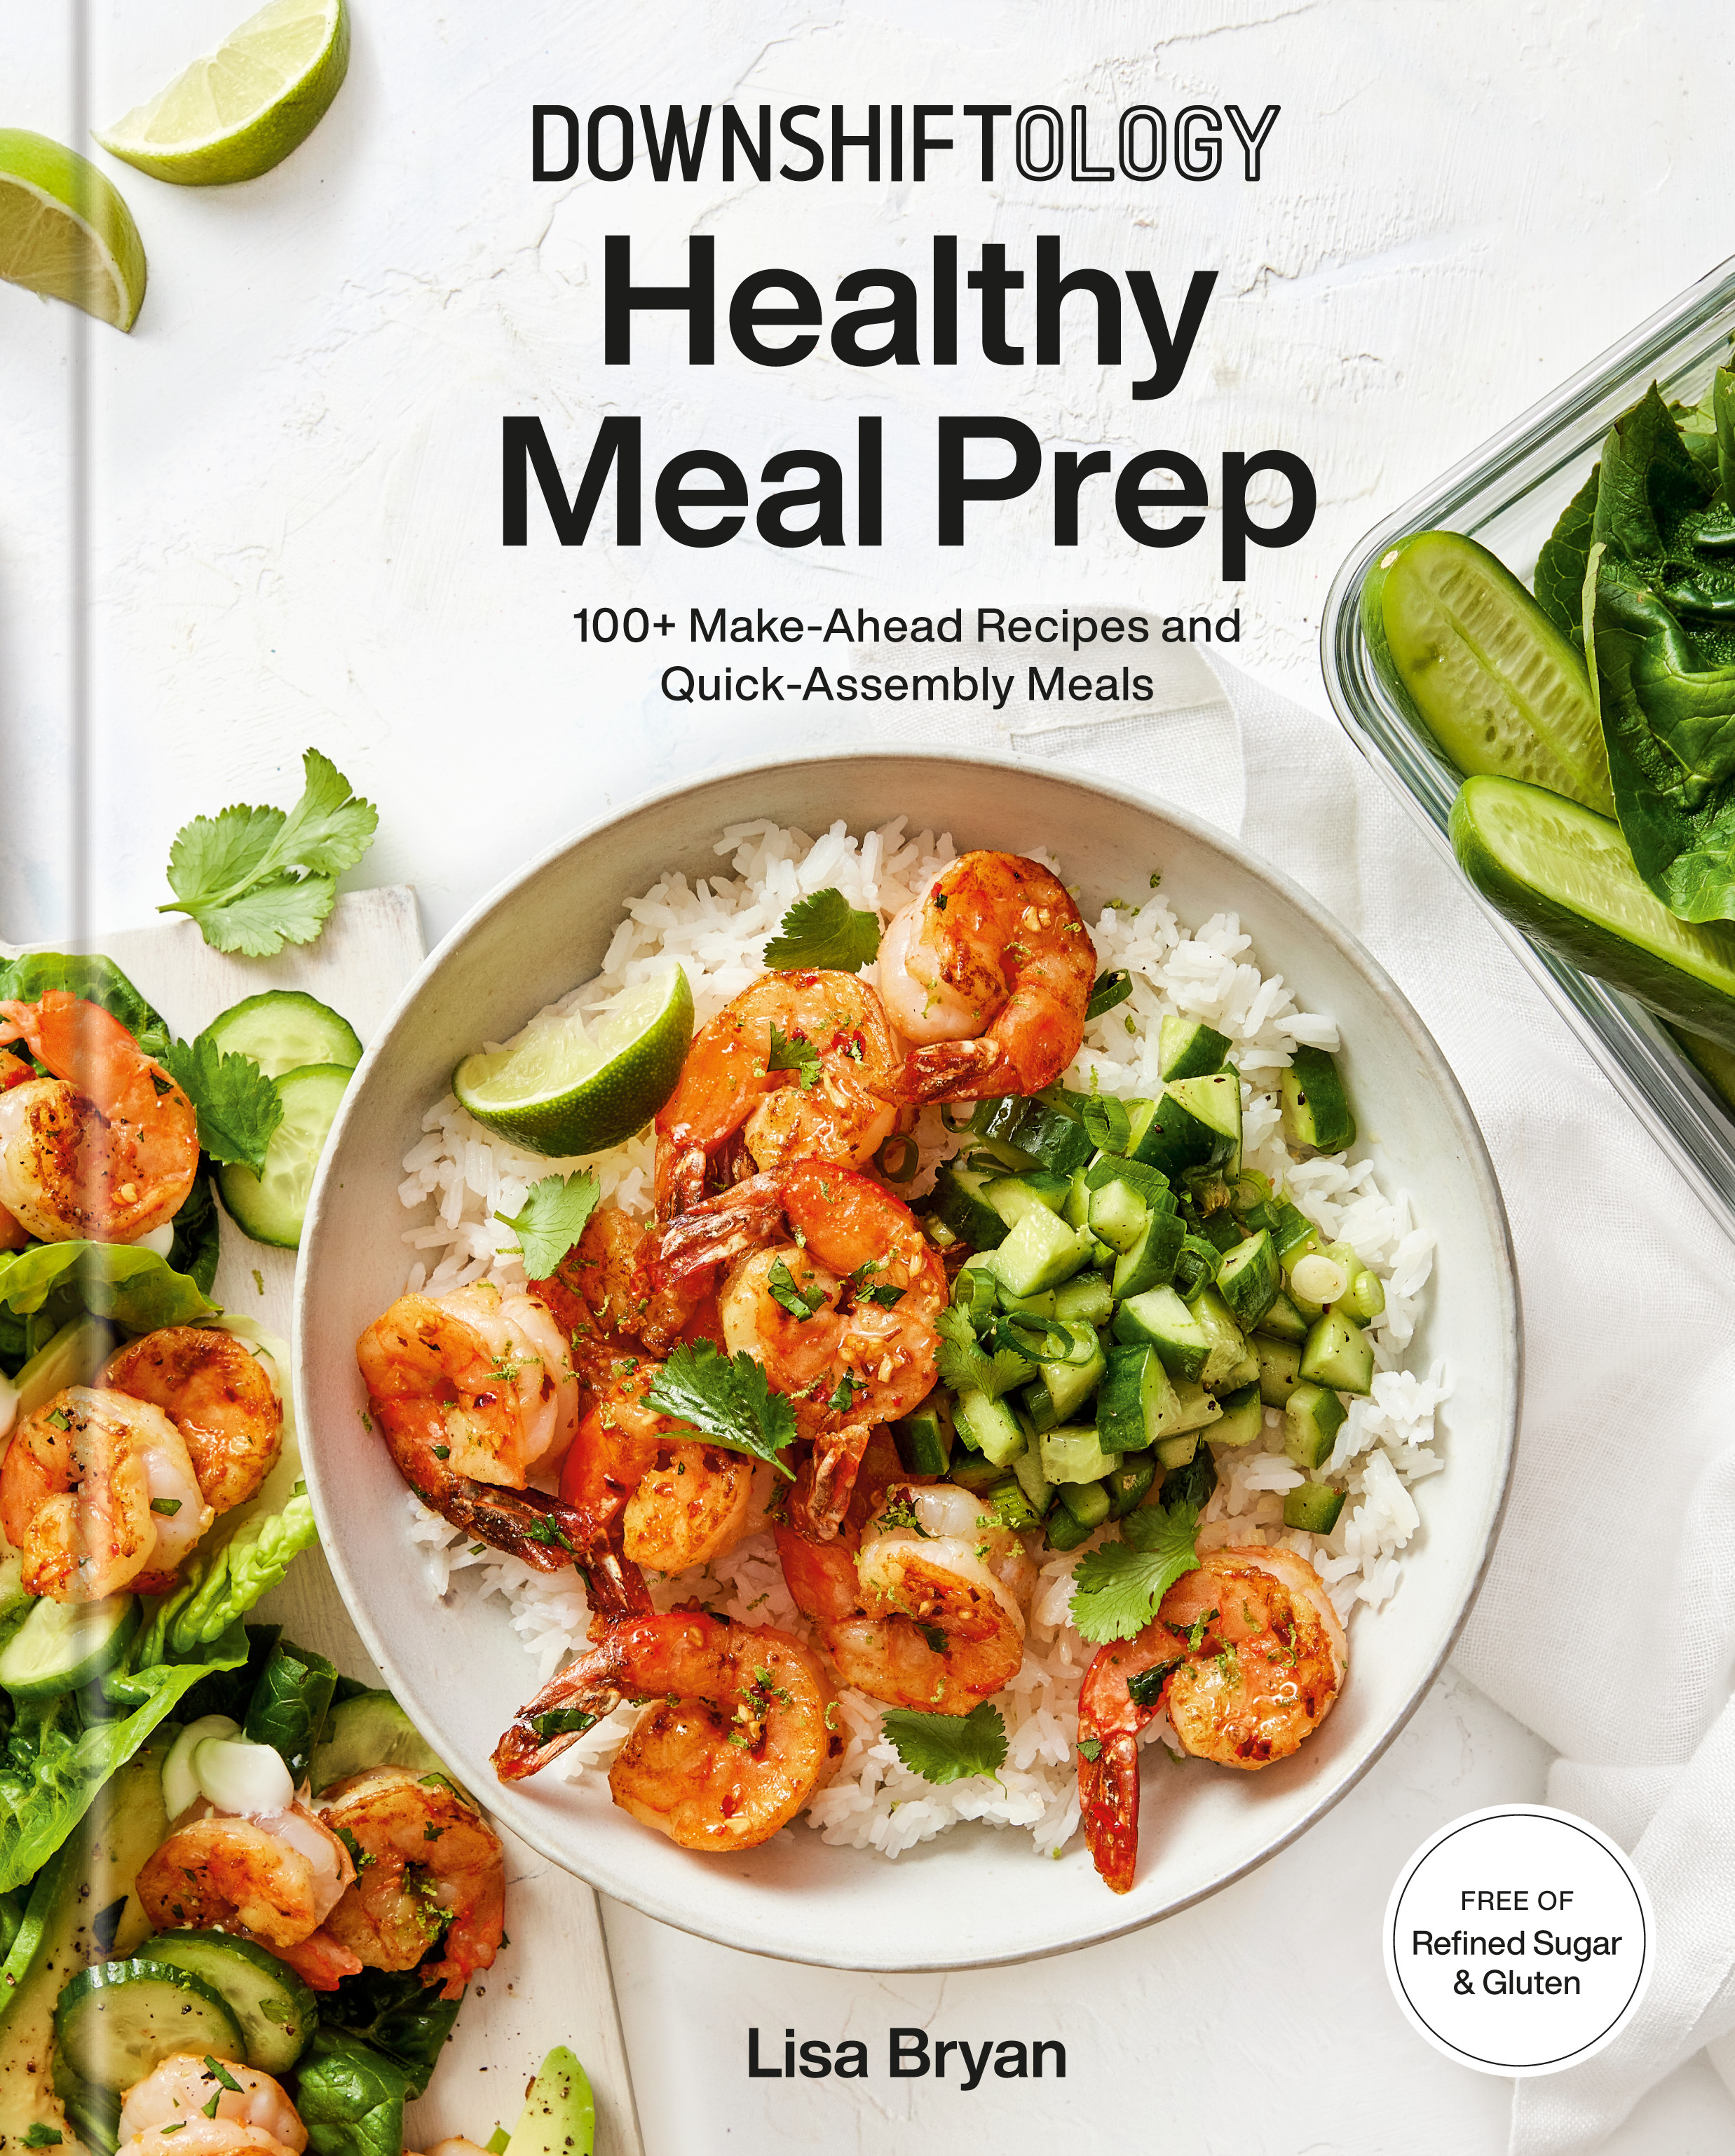 Downshiftology Healthy Meal Prep - 100+ Make-Ahead Recipes and Quick-Assembly Meals - A Gluten-Free Cookbook | Bryan, Lisa